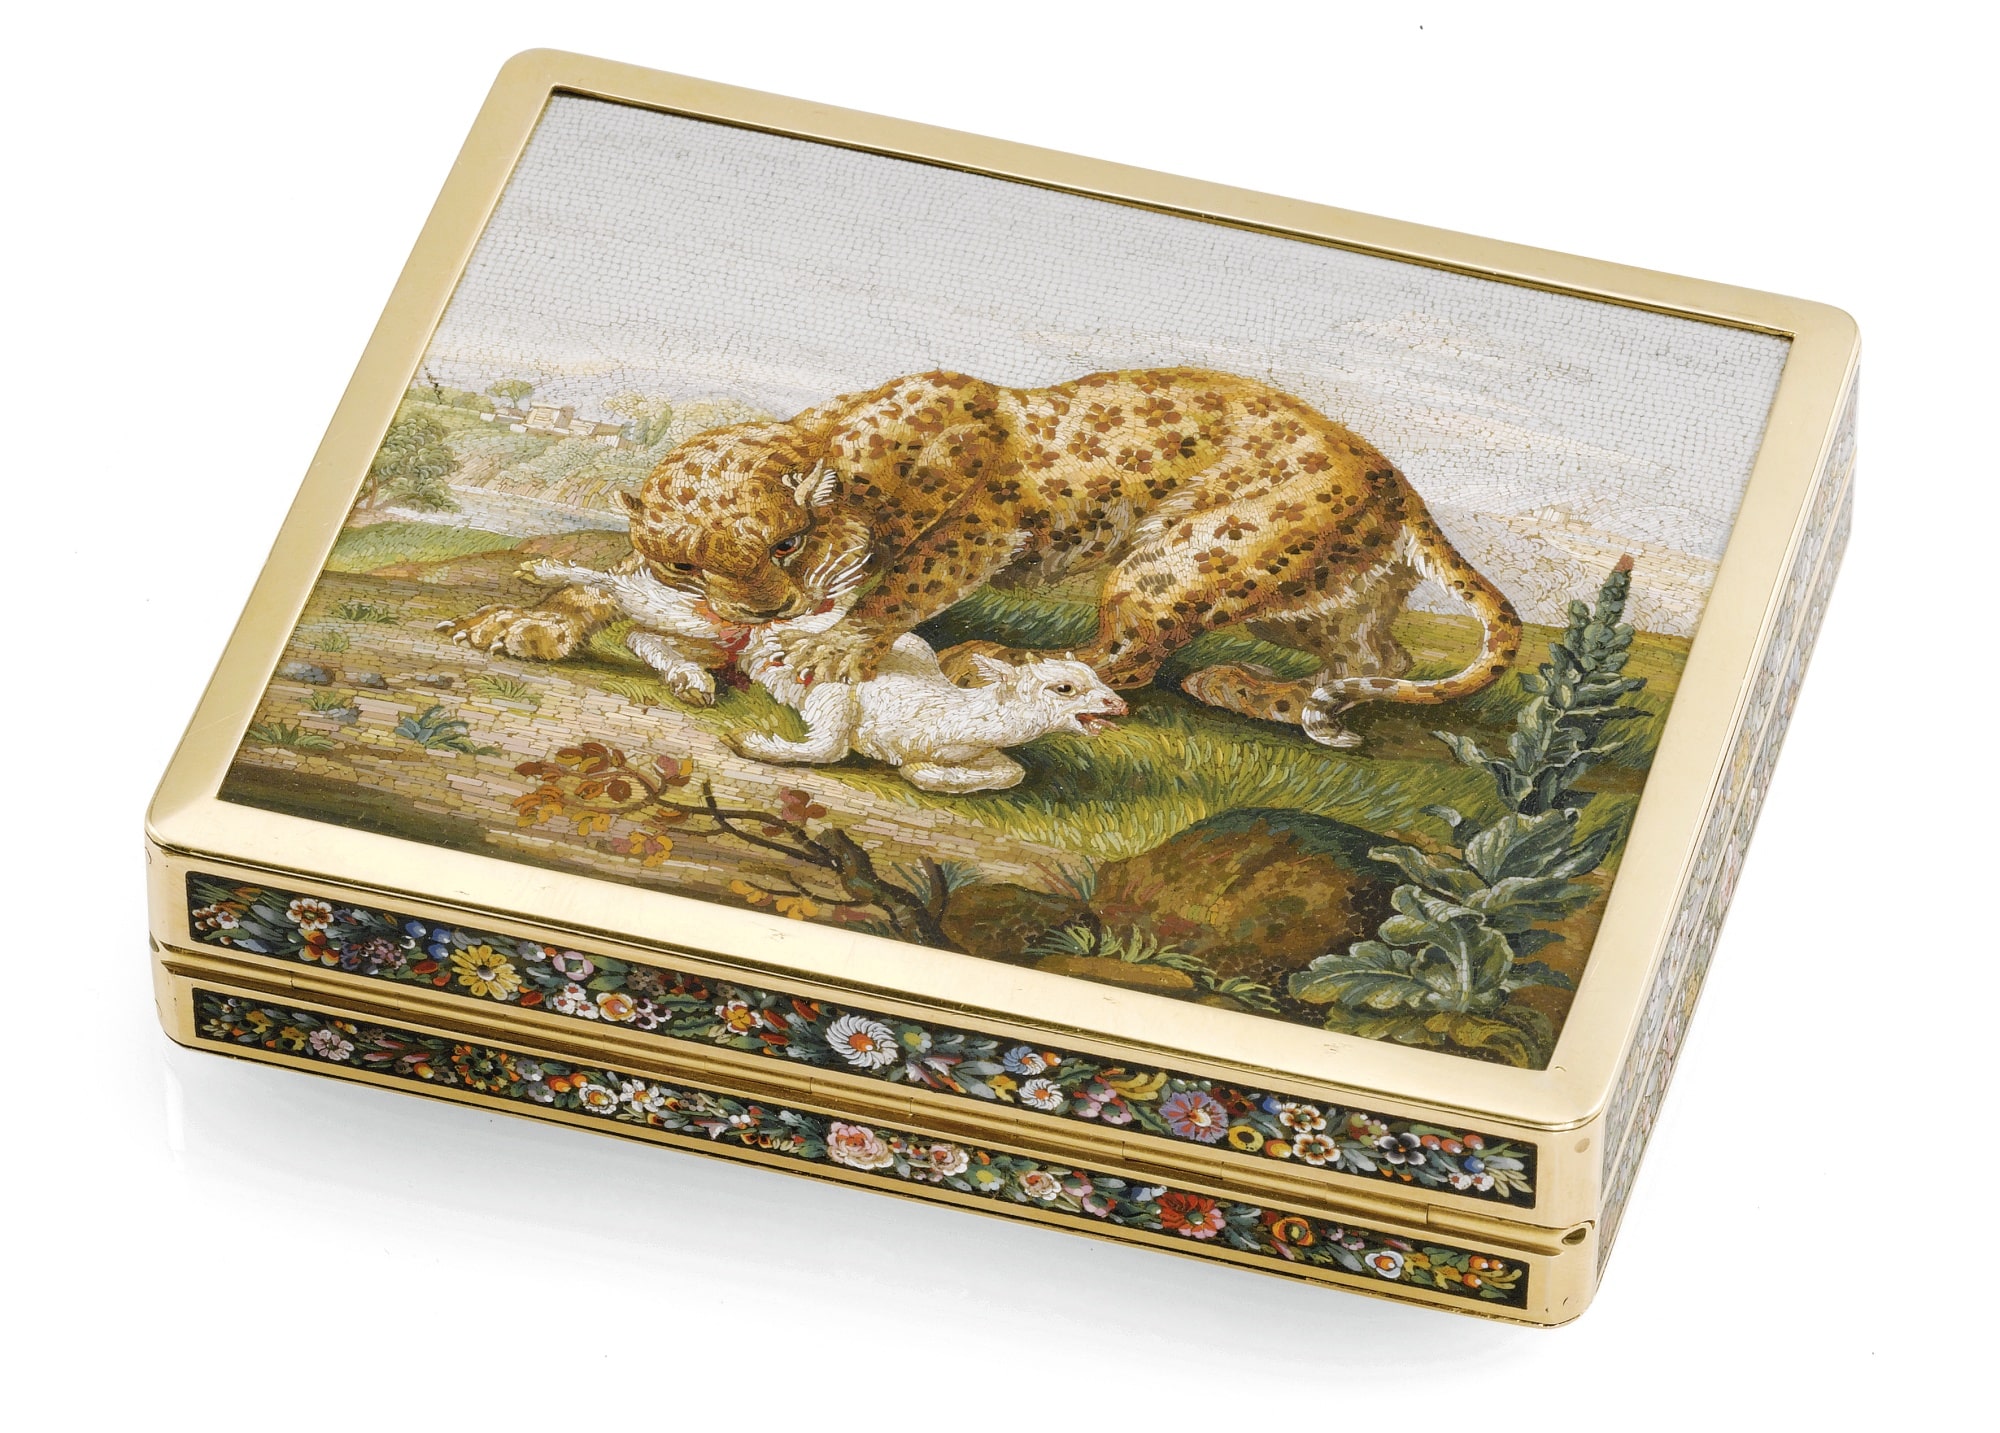 Reverse of Micromosaic Snuff Box. Photo Courtesy of Sotheby’s.